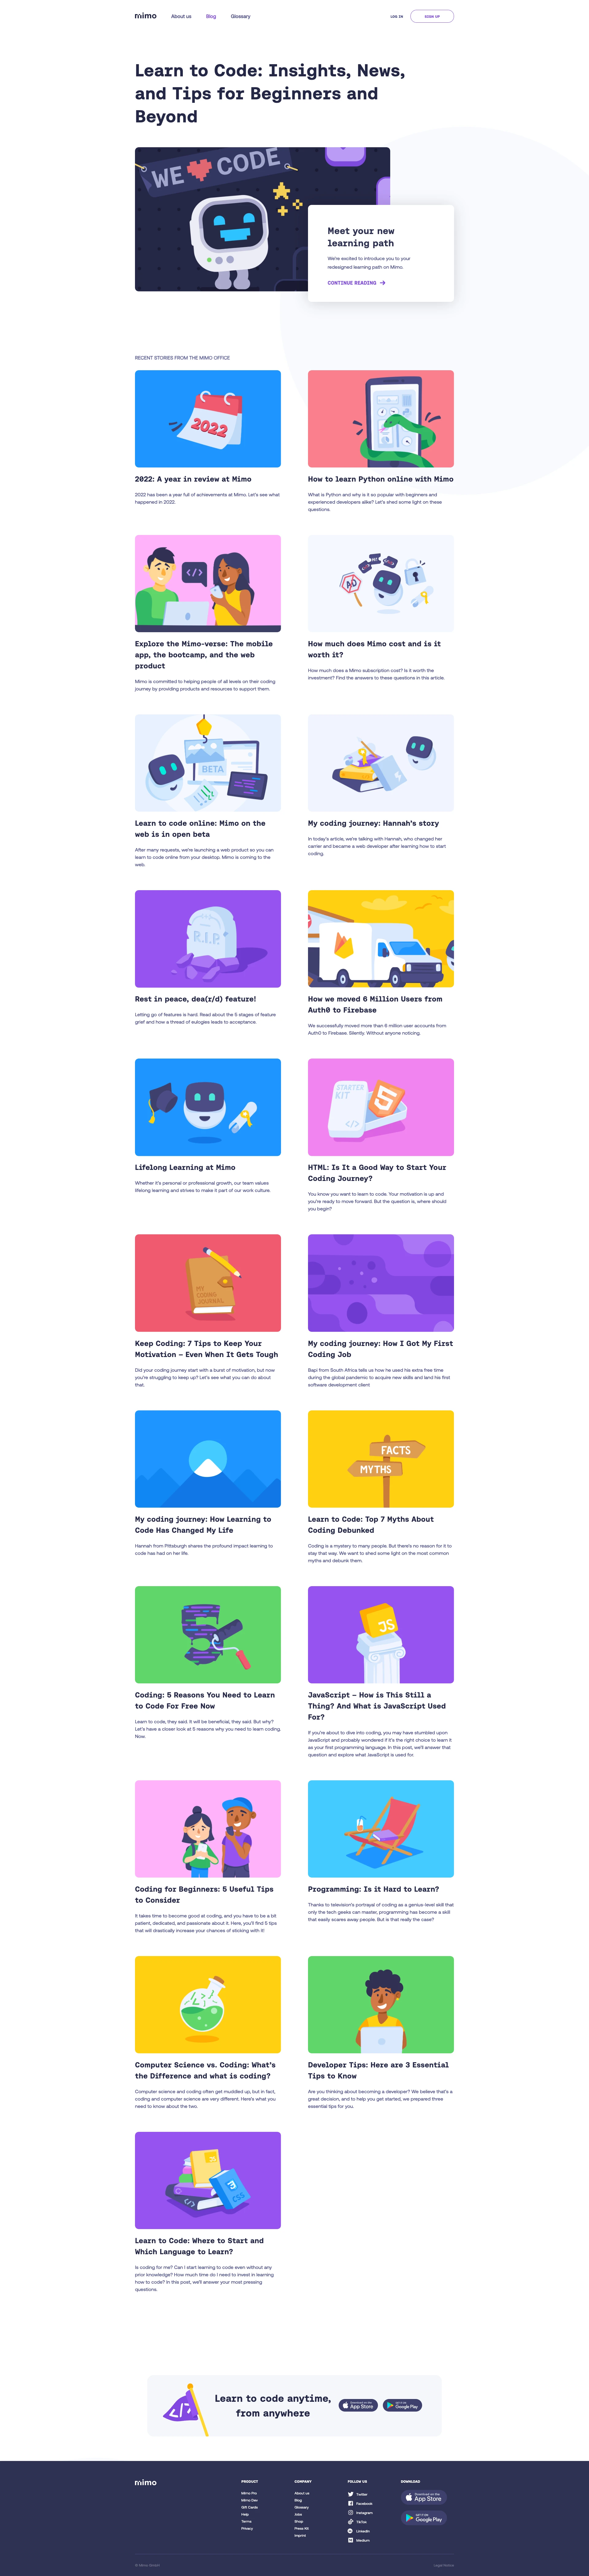 Mimo Landing Page Example: Learn to code at your own pace with Mimo. Offering beginner-friendly courses in Python, JavaScript, HTML, CSS, and more. Engage in interactive exercises, real-world projects, and earn shareable certificates. Join the Mimo community and start your coding journey today!